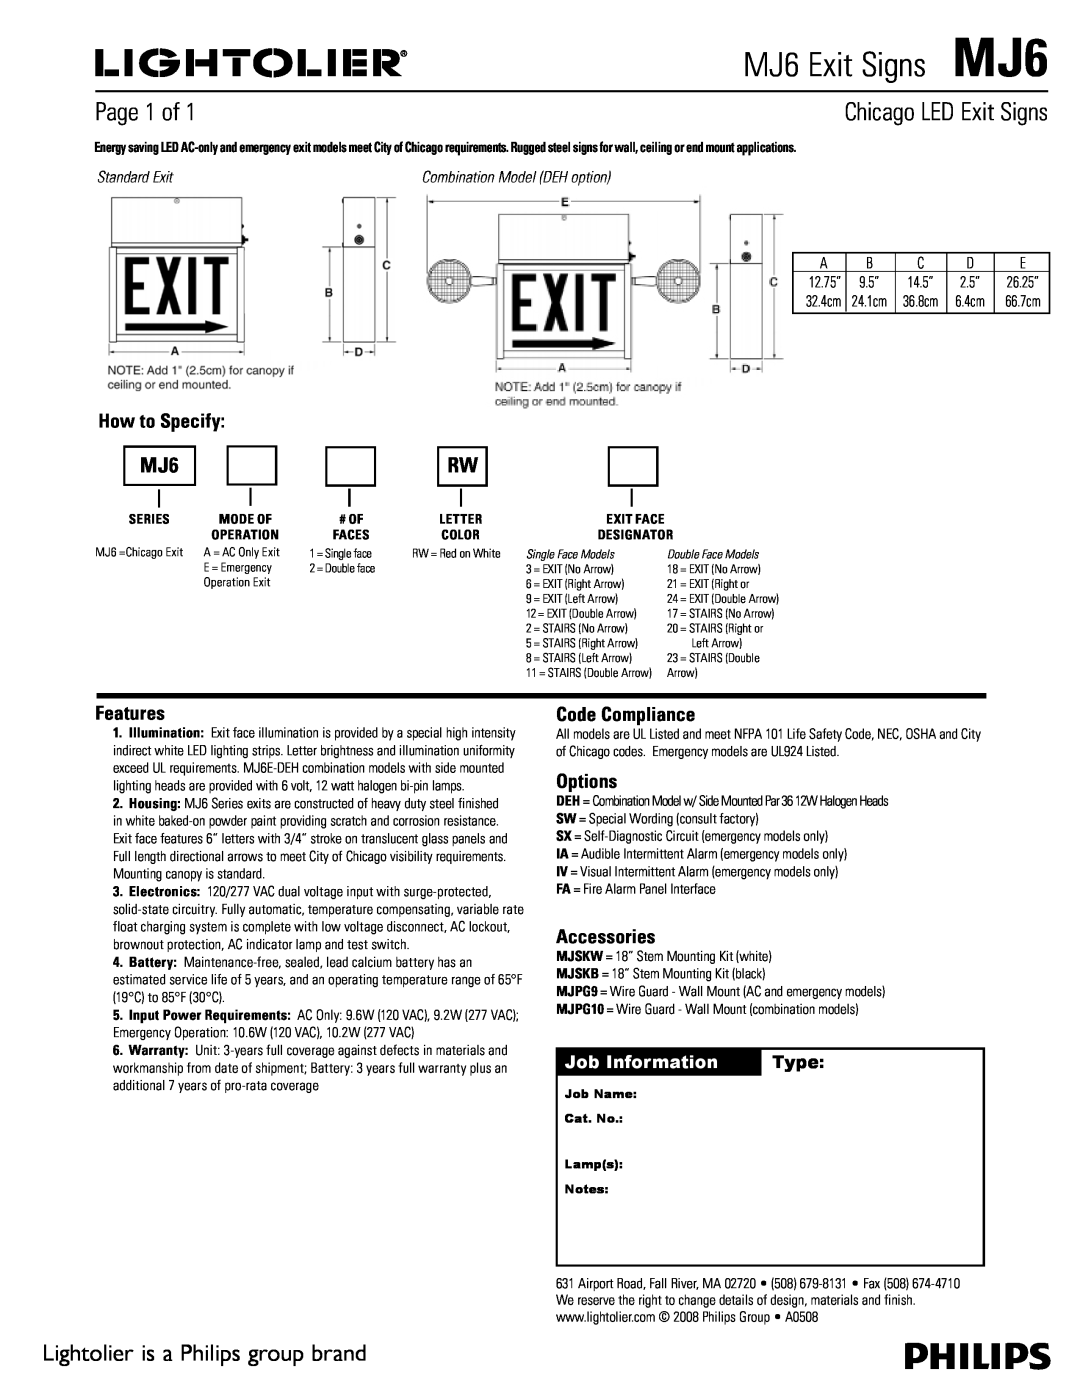 Lightolier warranty MJ6 Exit SignsMJ6, Chicago LED Exit Signs, Page 1 of, Lightolier is a Philips group brand, Features 